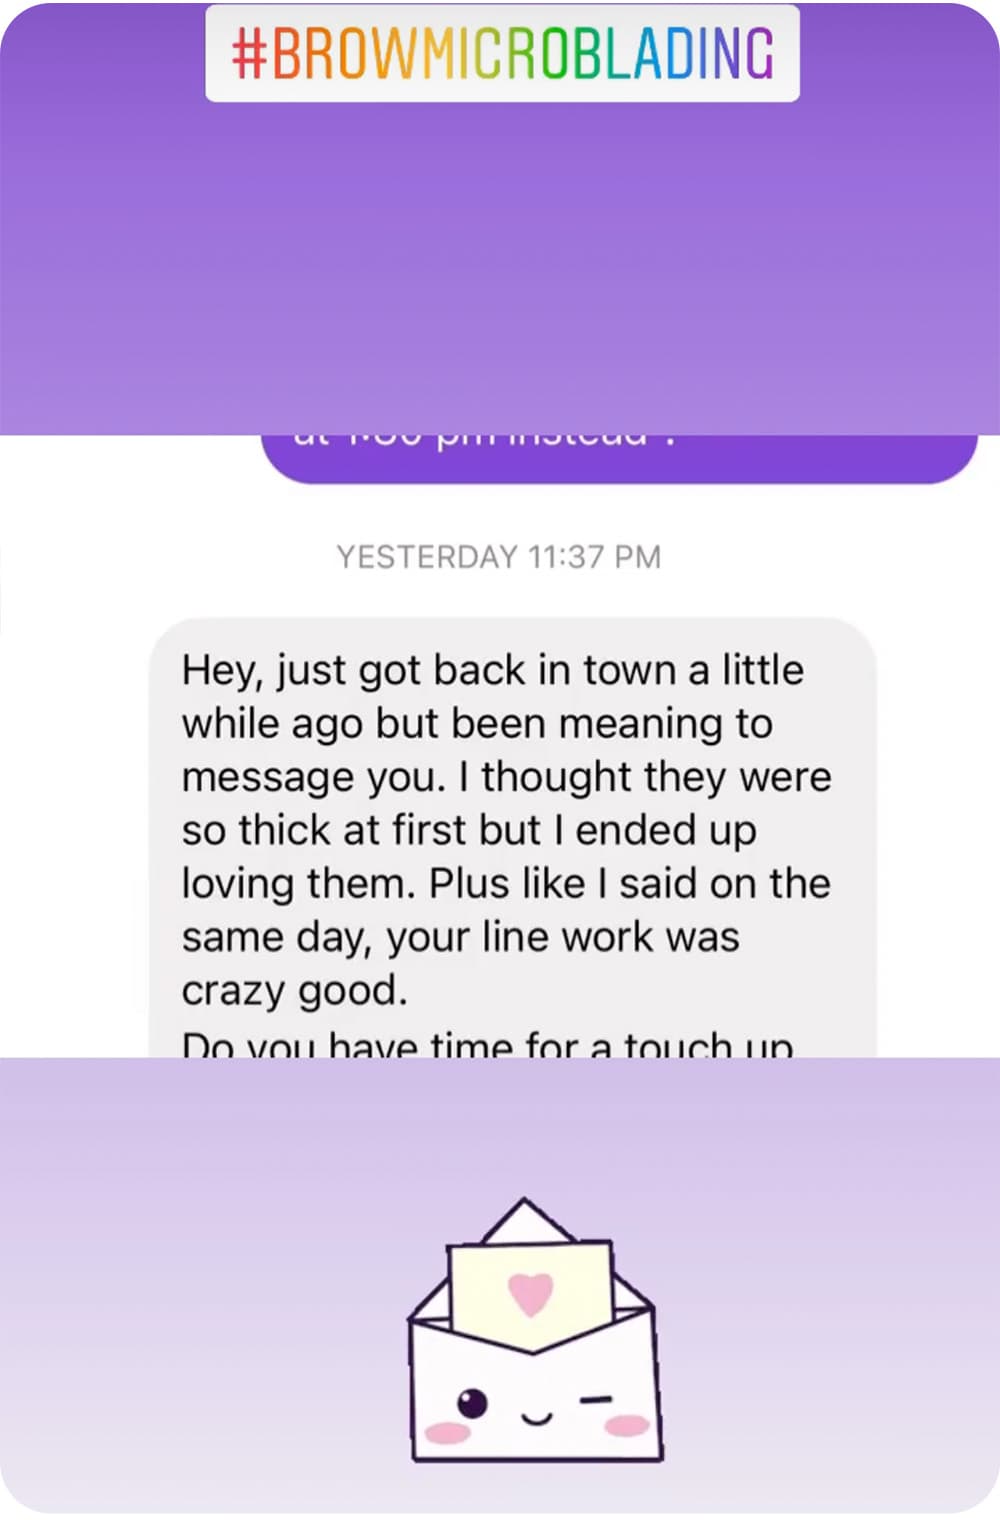 hey just got back in town a little while ago meaning to message you. i thought they were so thick at first but i ended up loving them. Plus like I said on the same day, your line work was crazy good.